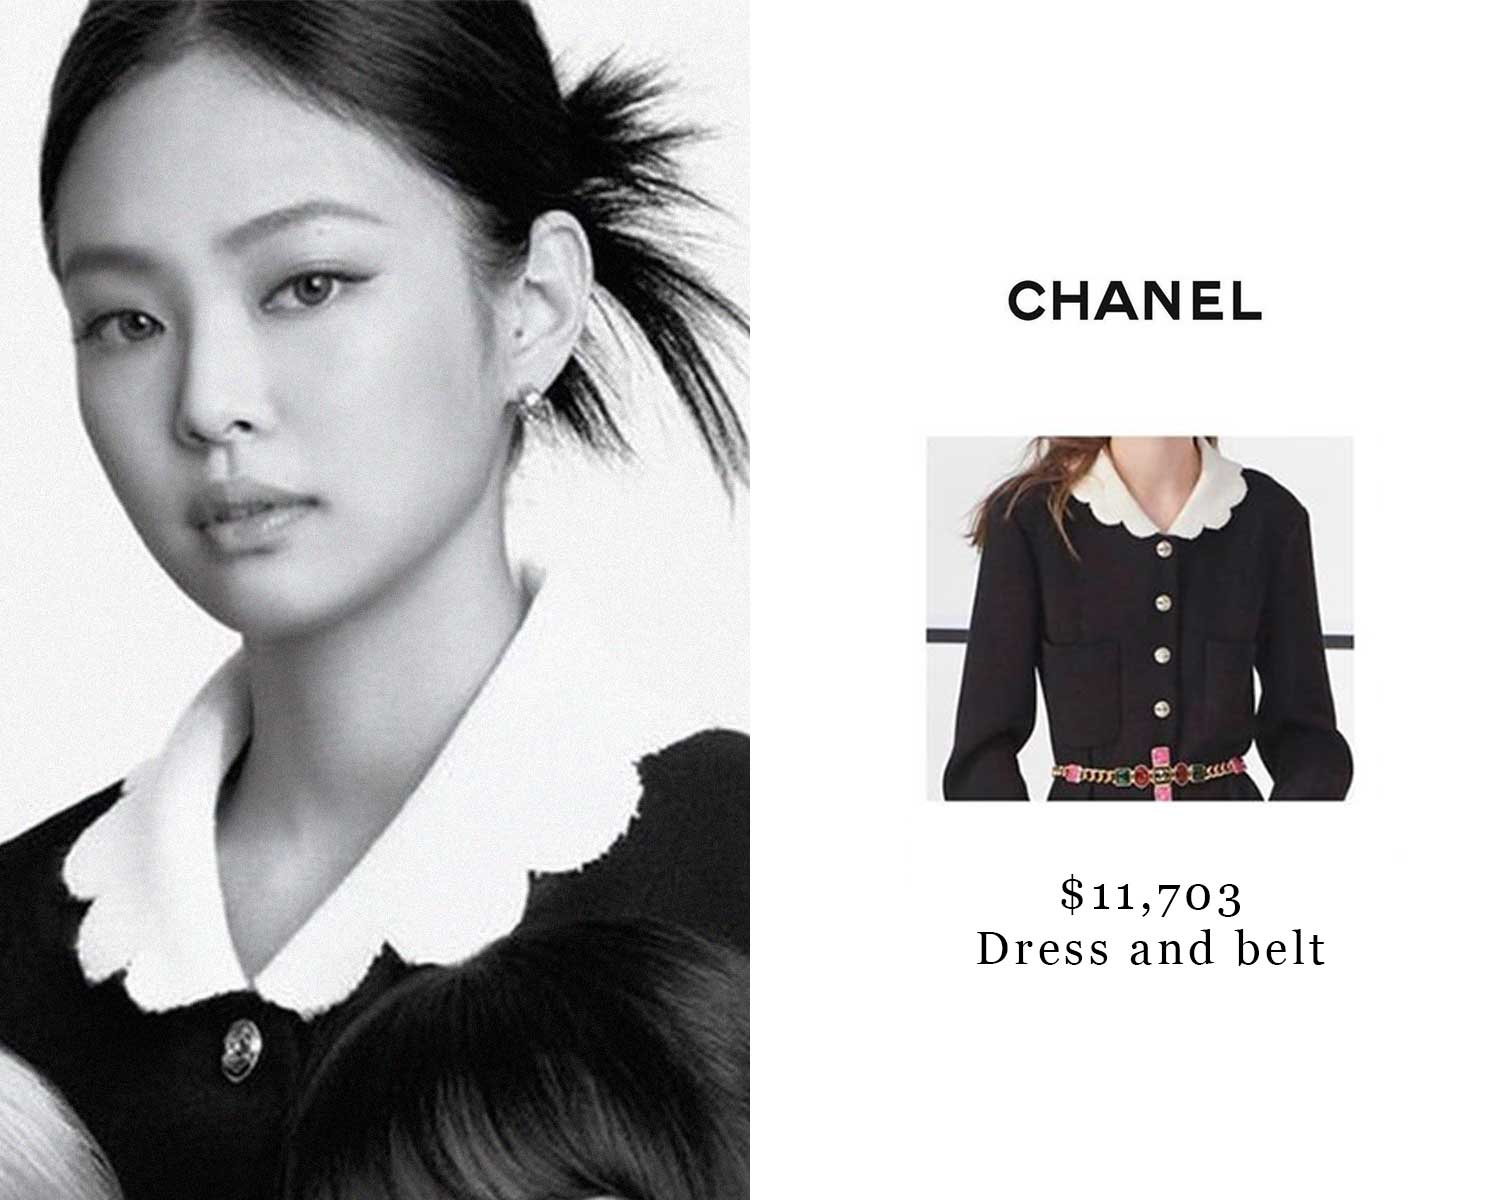 10 Of The Most Expensive Chanel Pieces Jennie Kim Has Ever Worn | vlr ...